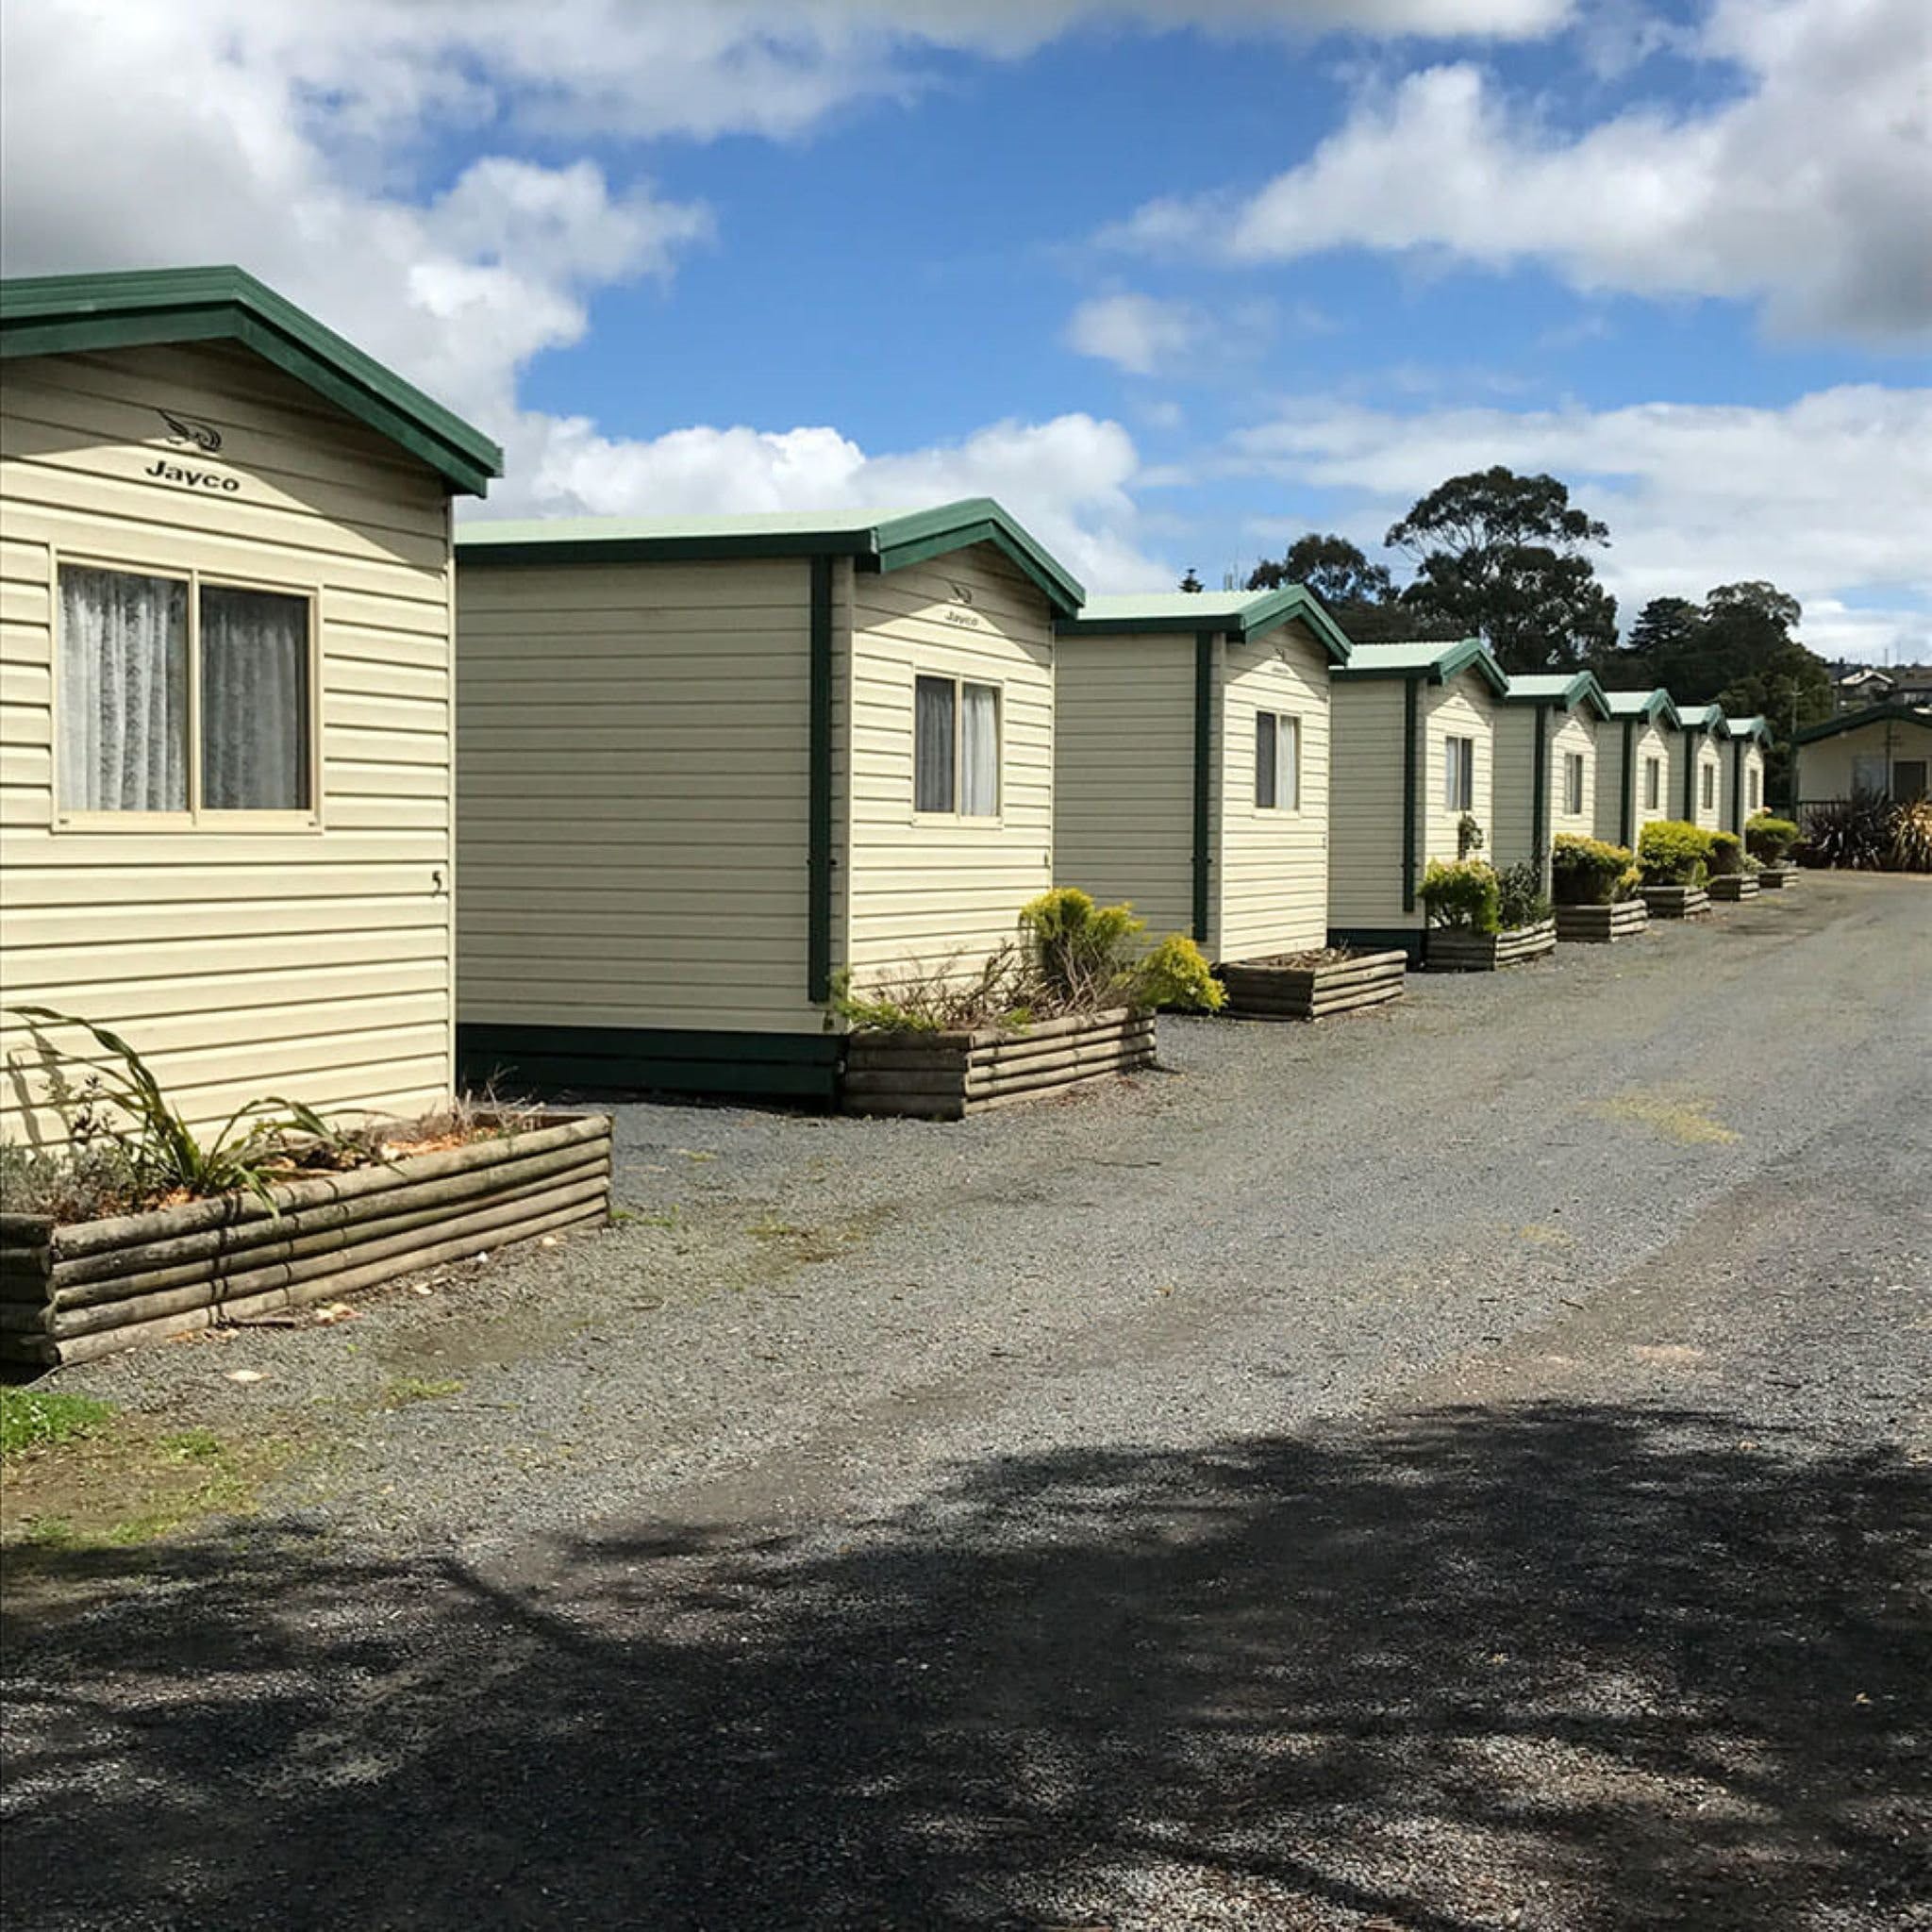 Prom Central Caravan Park - Accommodation Bookings